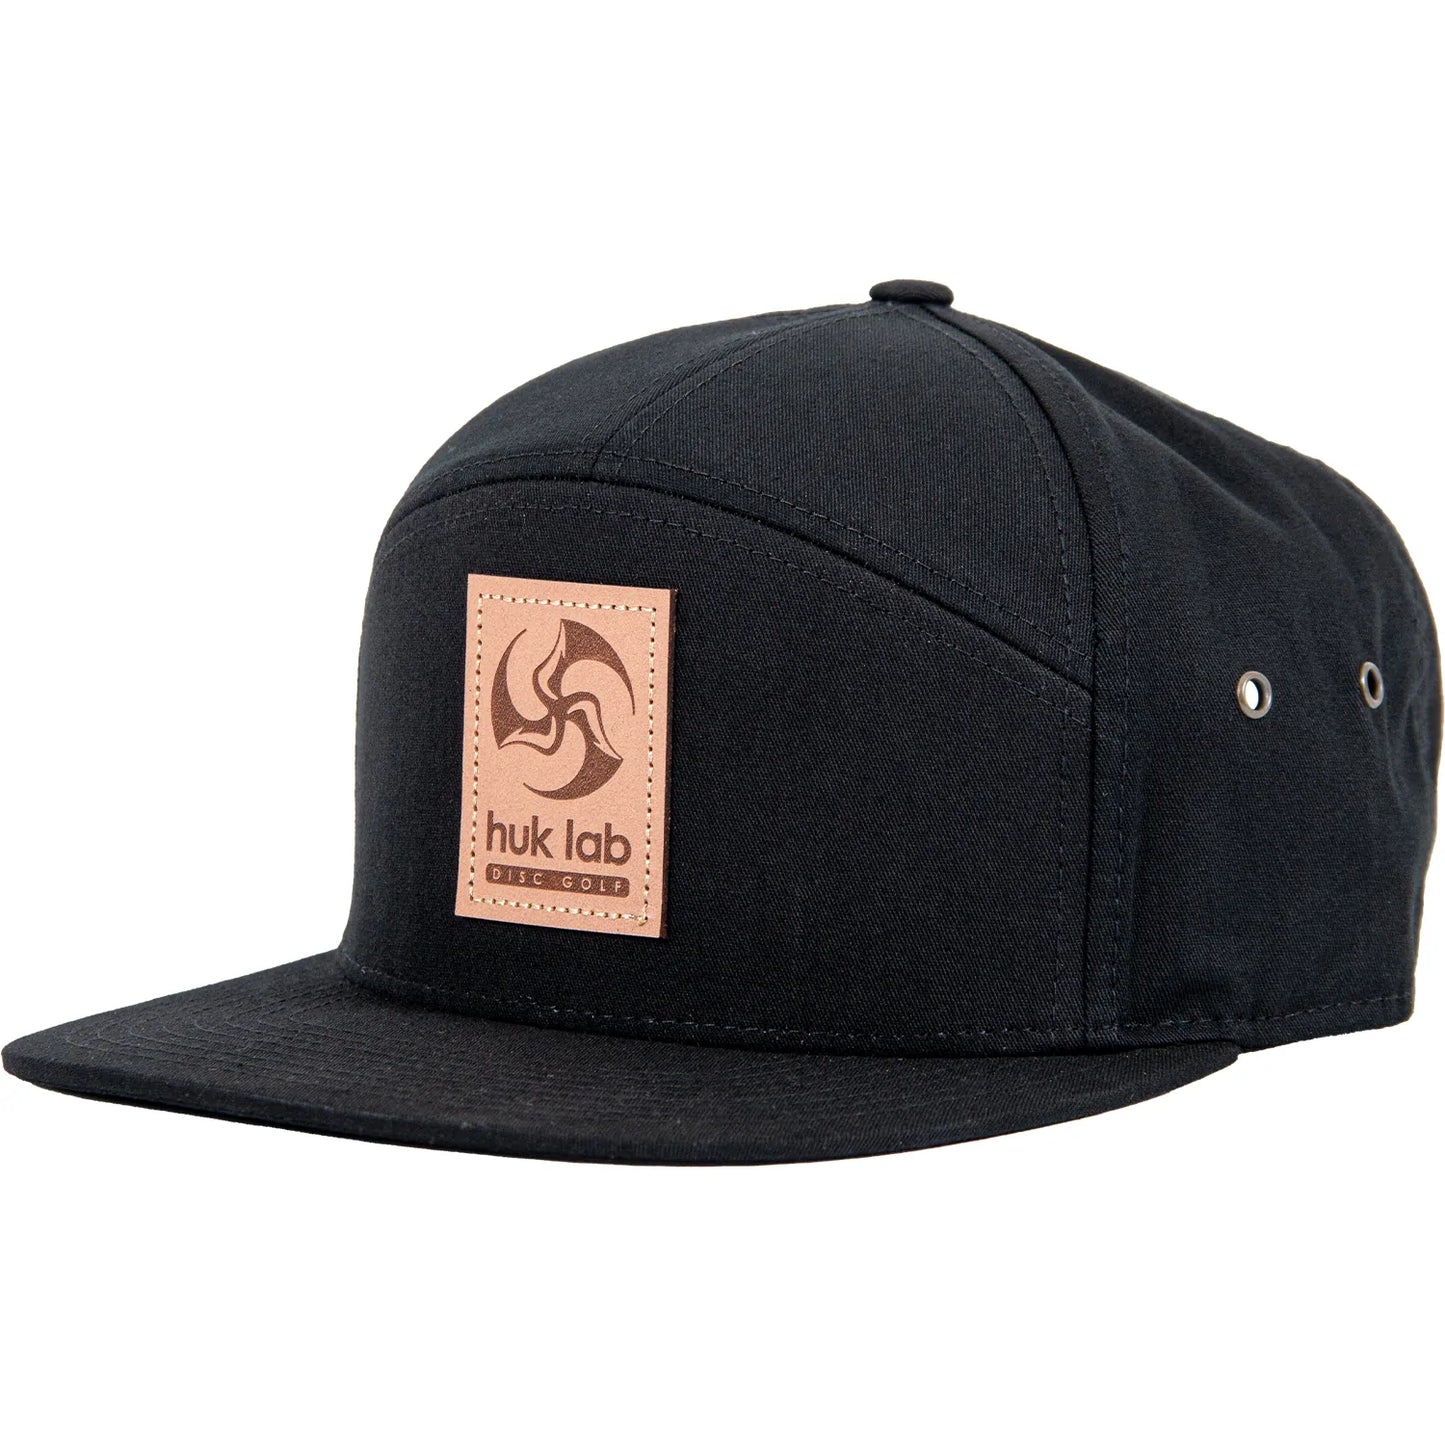 Huk Lab Strapback Hat w/ Leather TriFly Patch